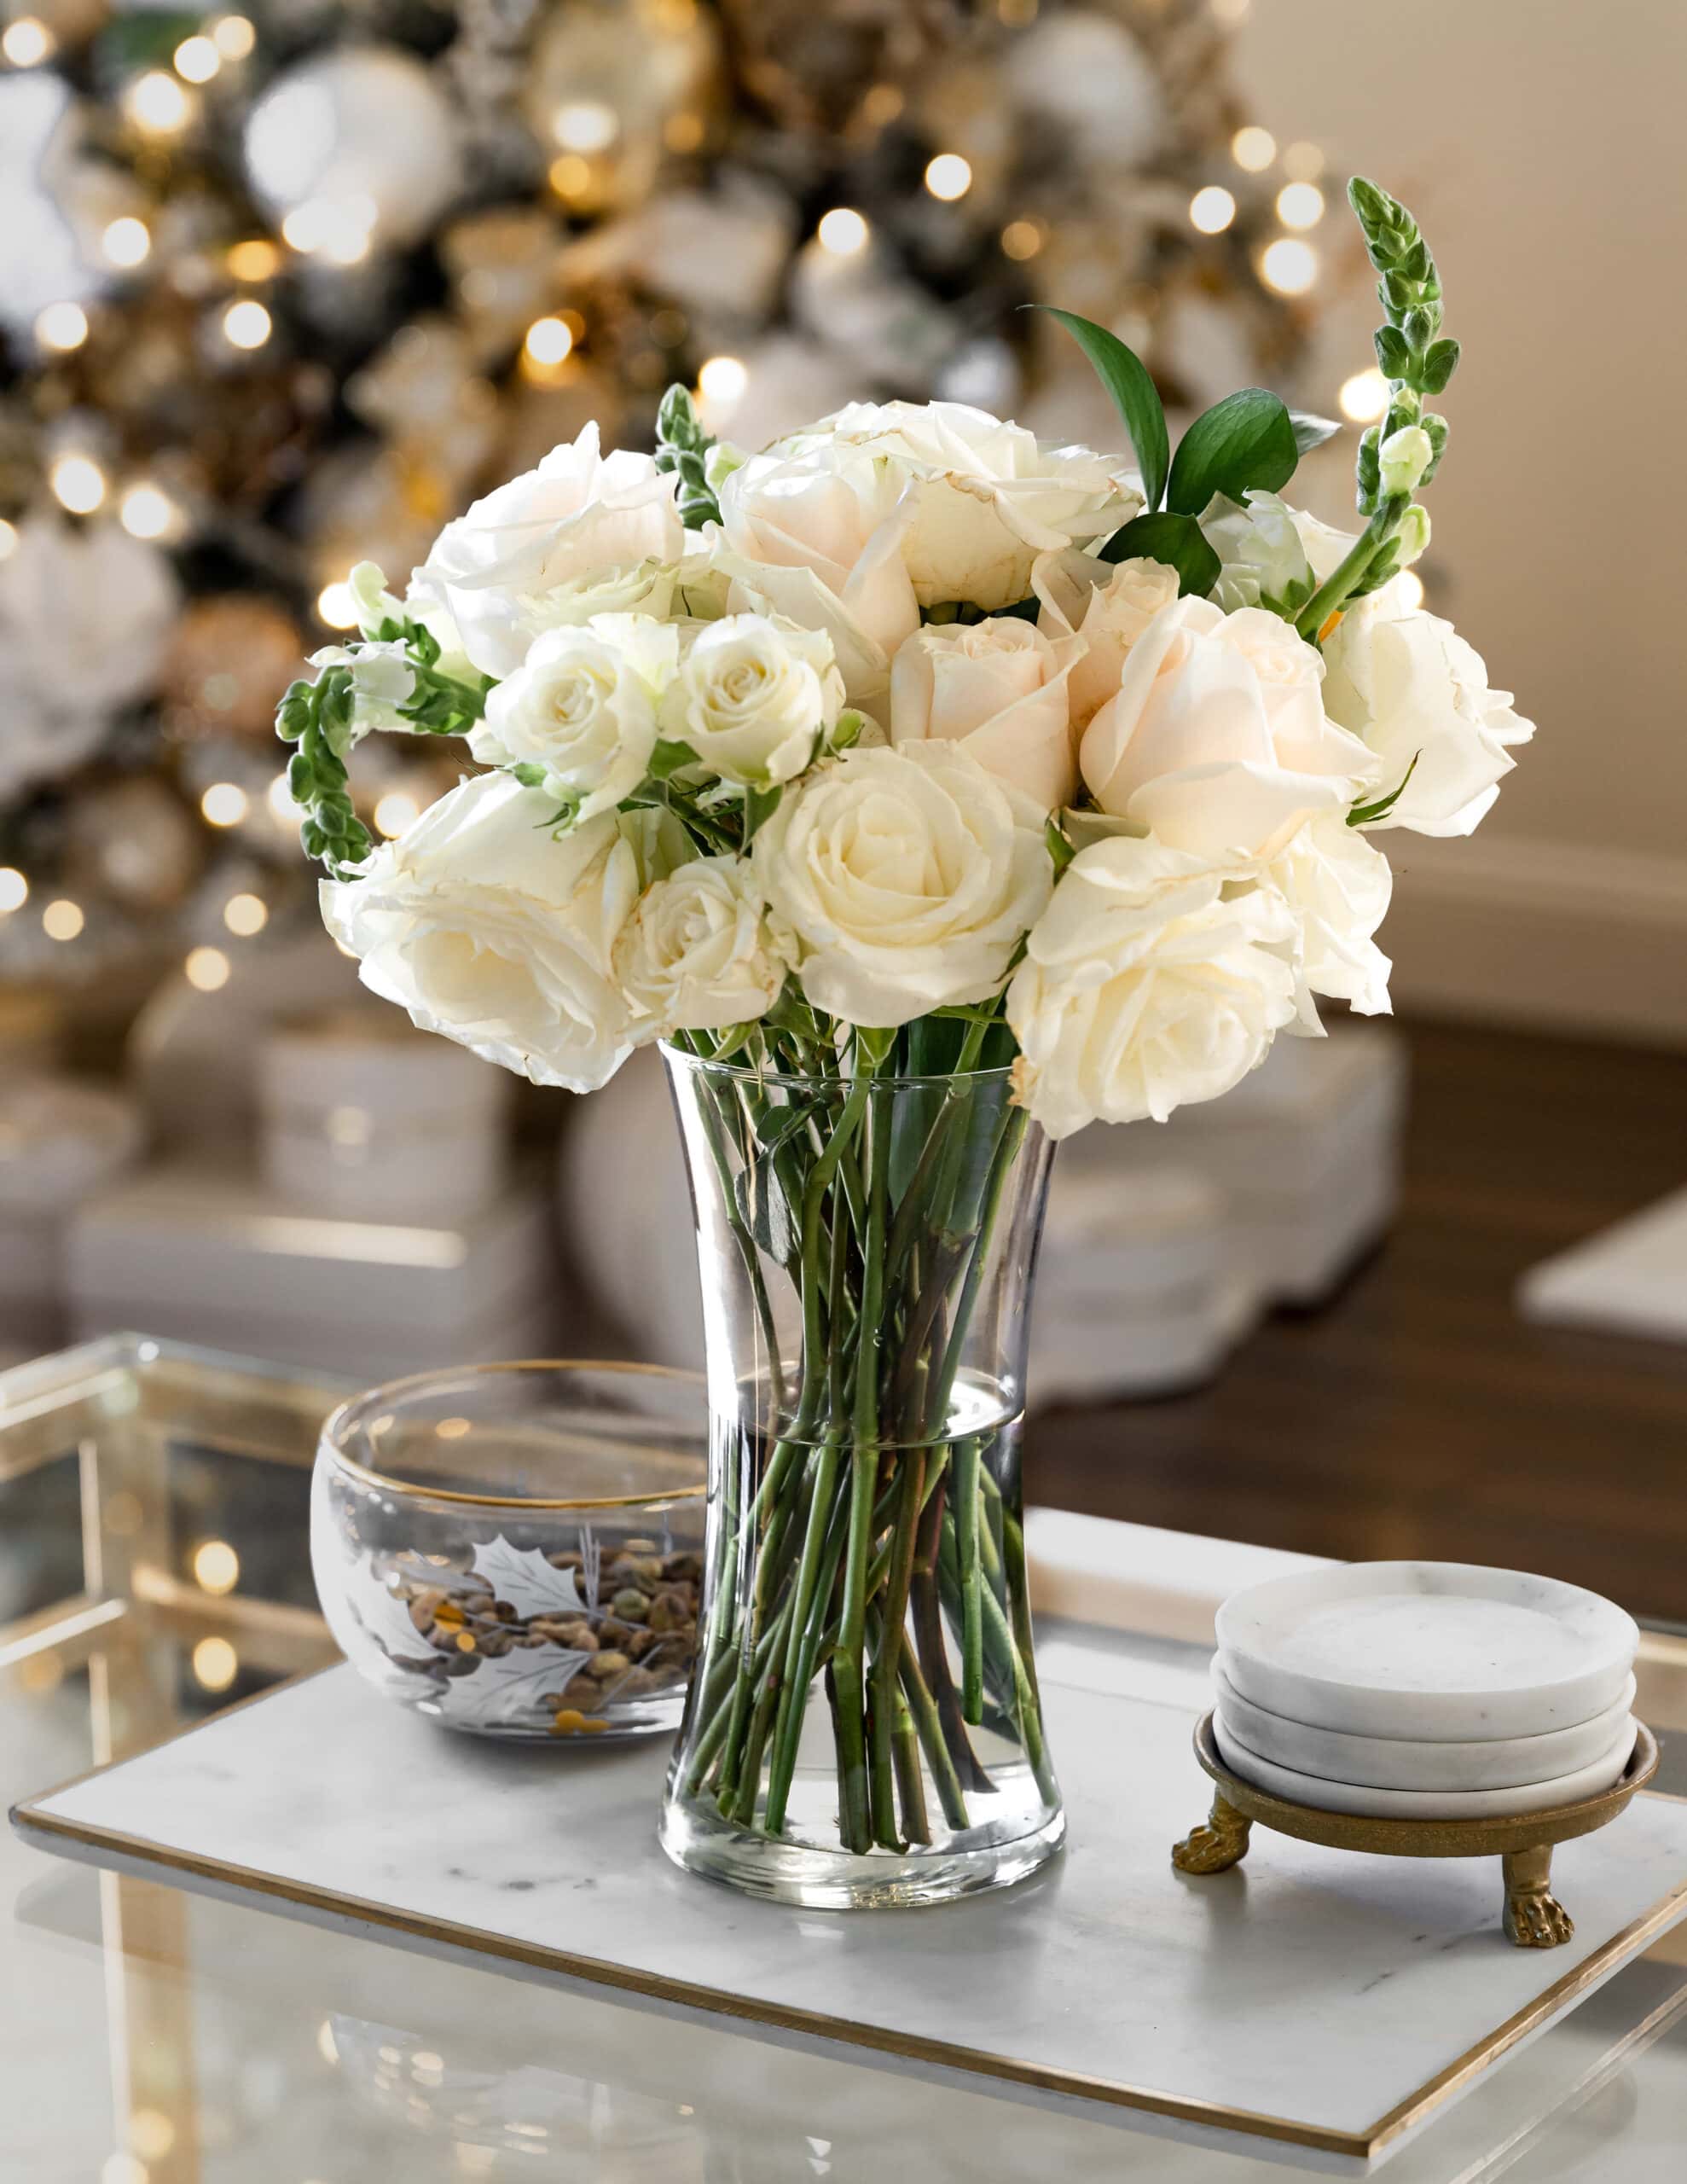 A bouquet of white and blush roses with green stems, sitting on a marble stand, white a gold claw footed coaster holder and a glass bowl off to the side.